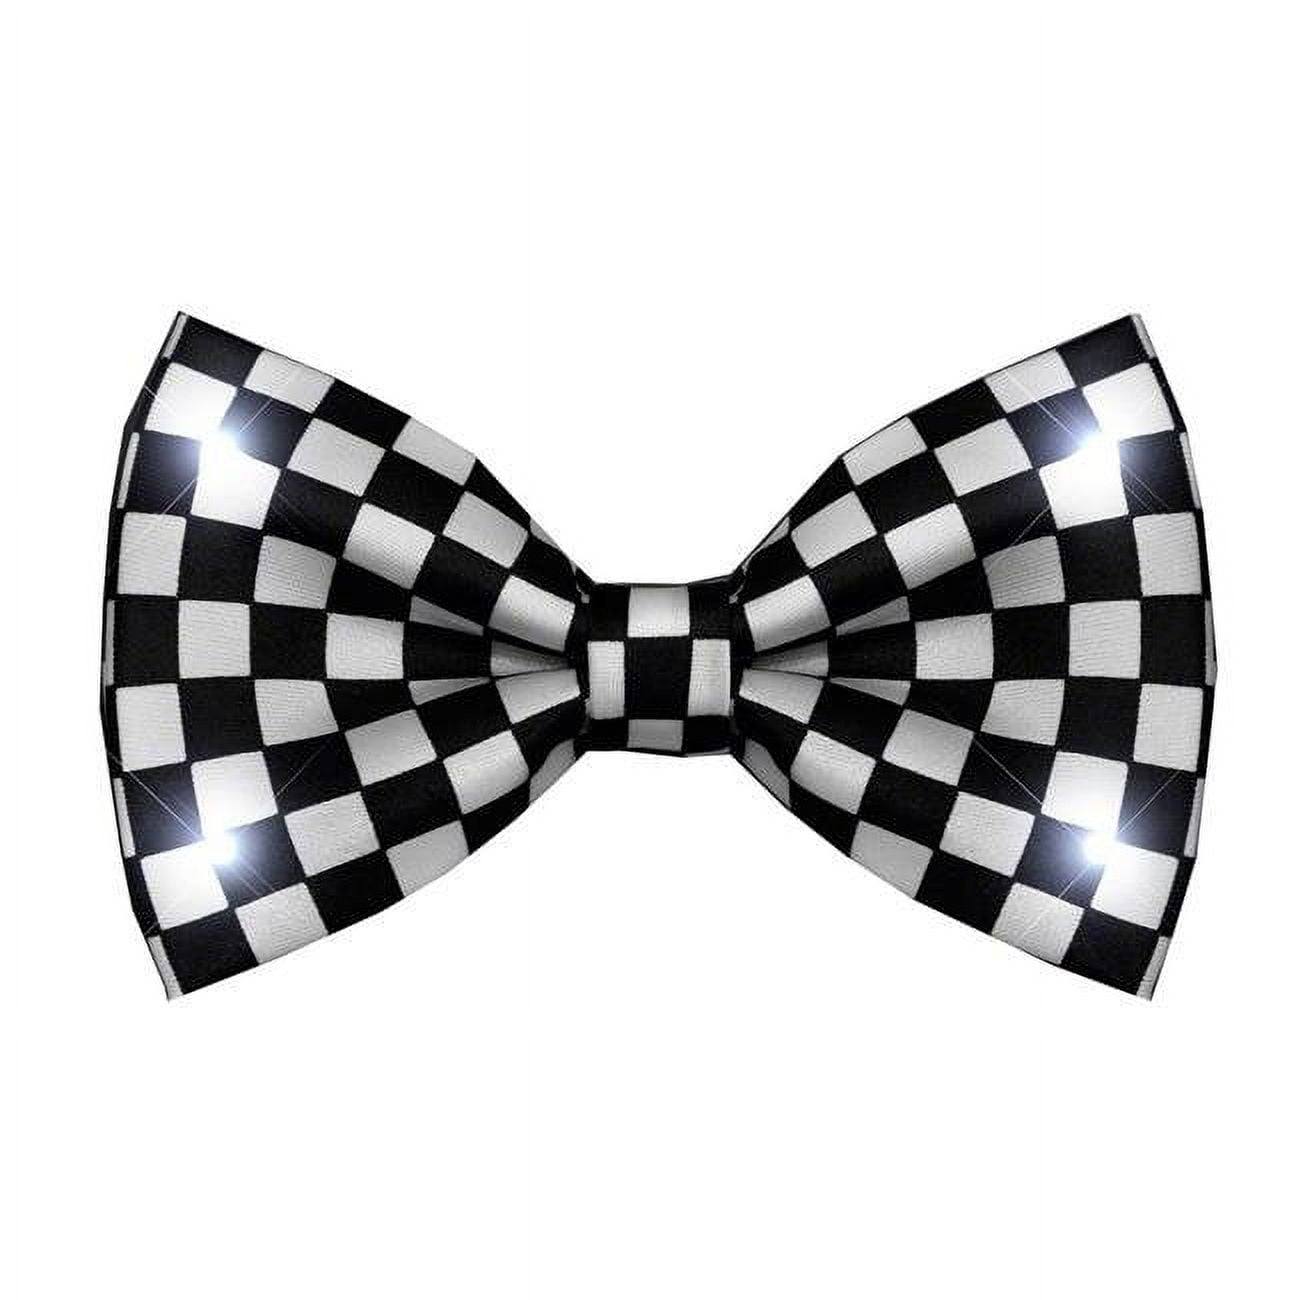 Picture of Blinkee A670 Black & White Checkered Bow Tie with White LED Lights